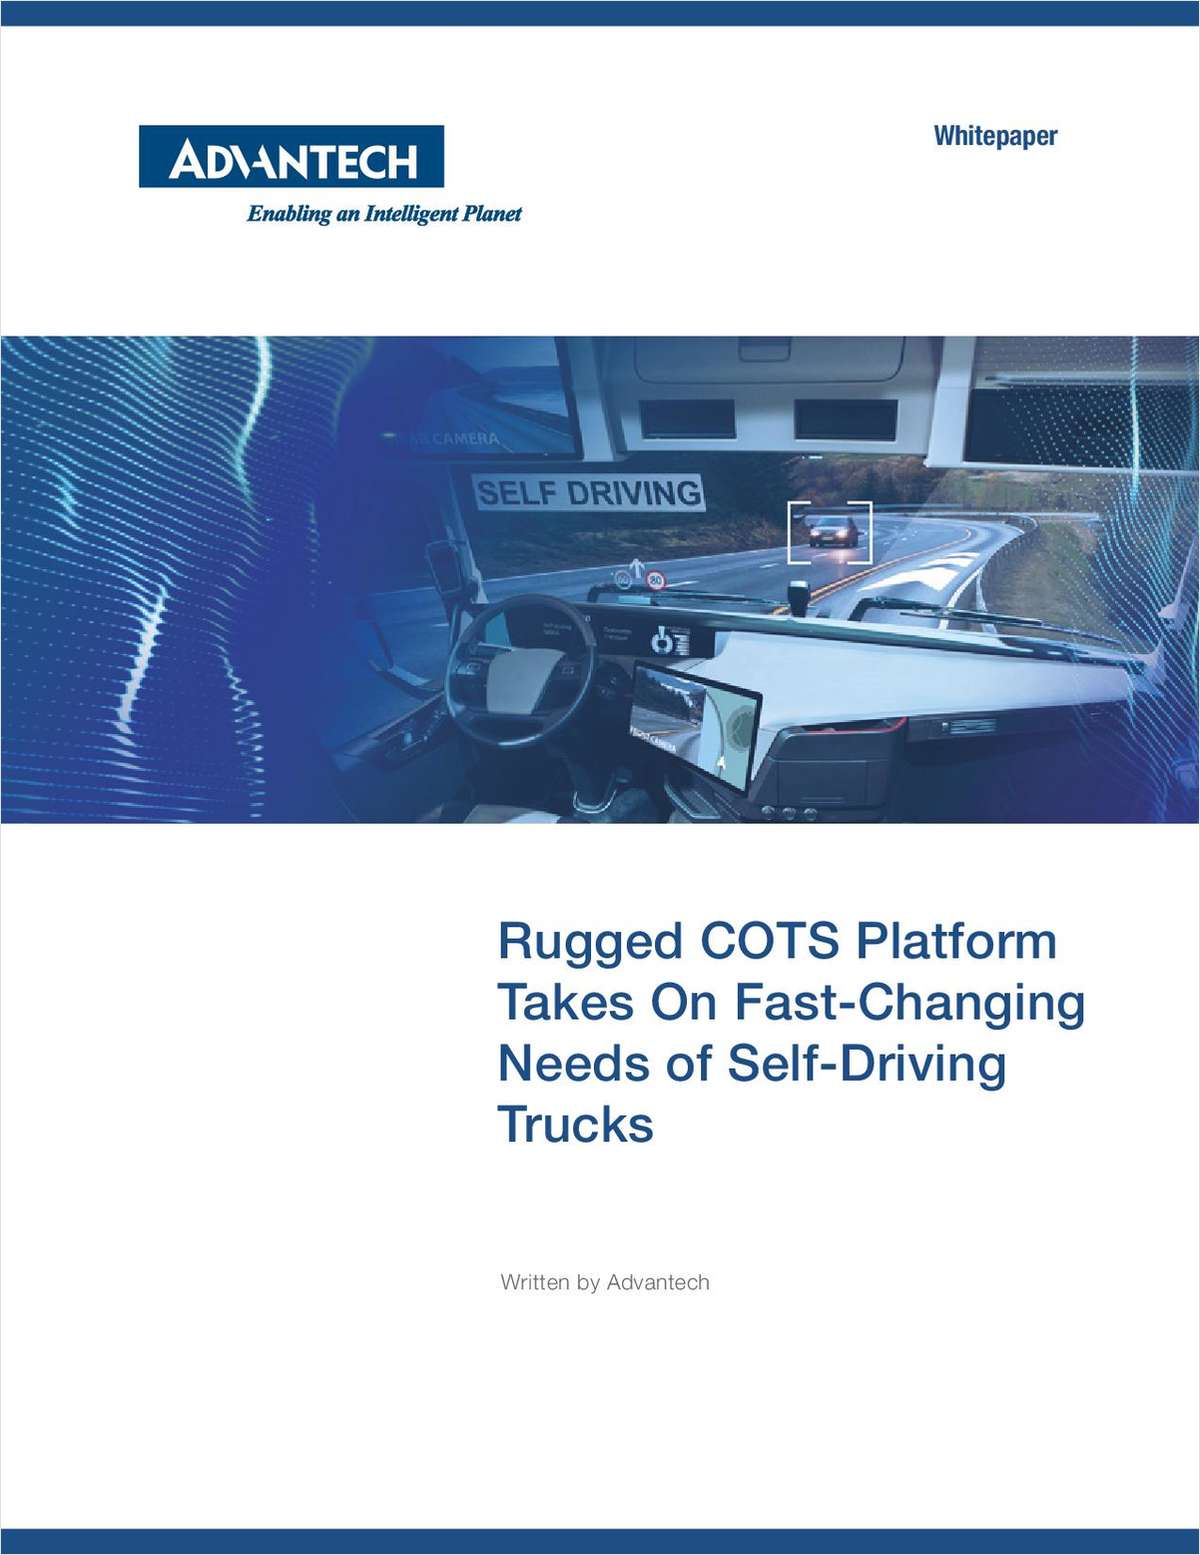 Rugged COTS Platform Takes On Fast-Changing Needs of Self-Driving Trucks